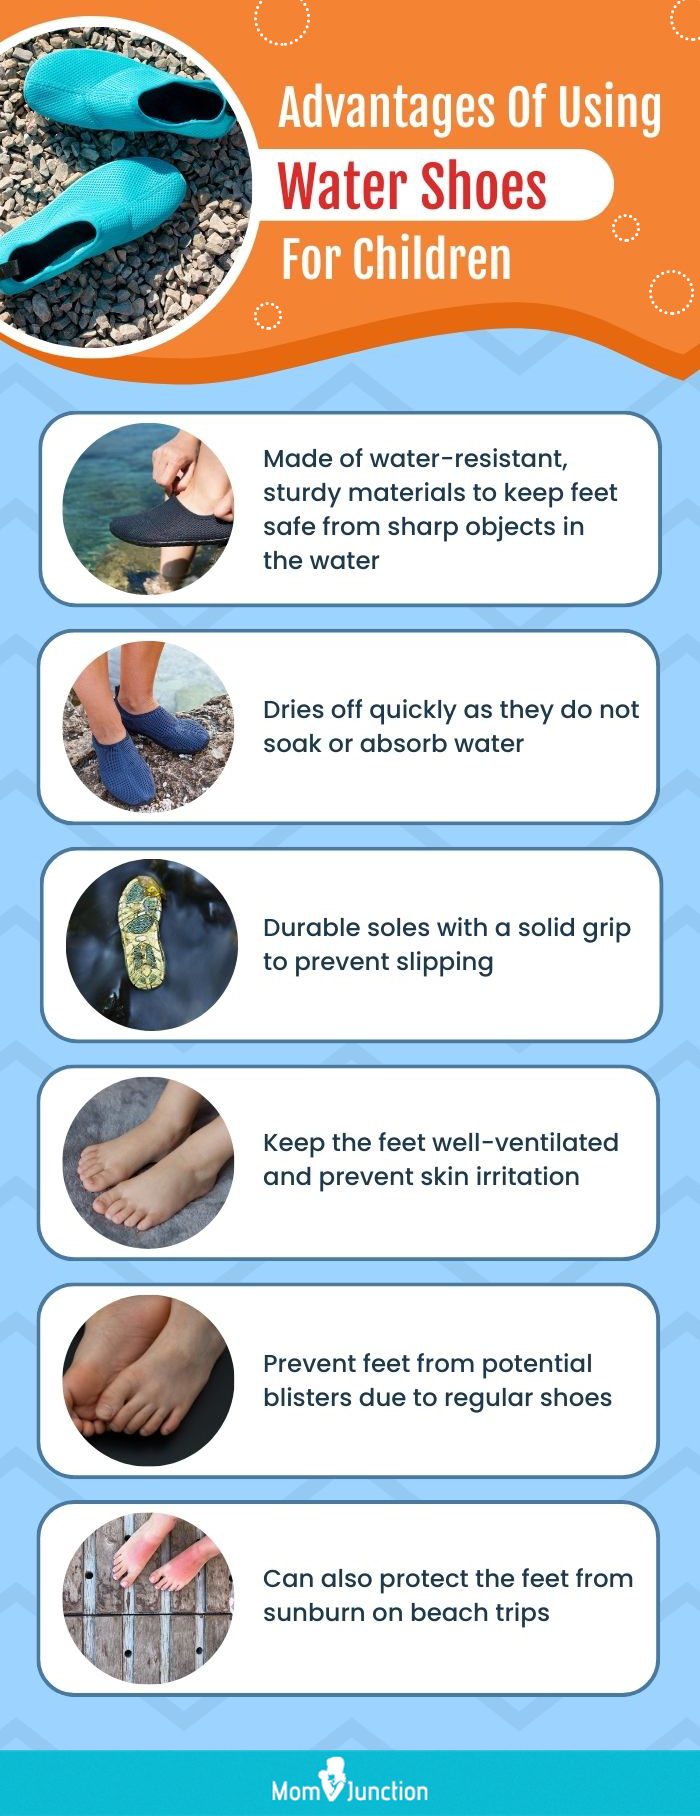 Advantages Of Using Water Shoes For Children (infographic)